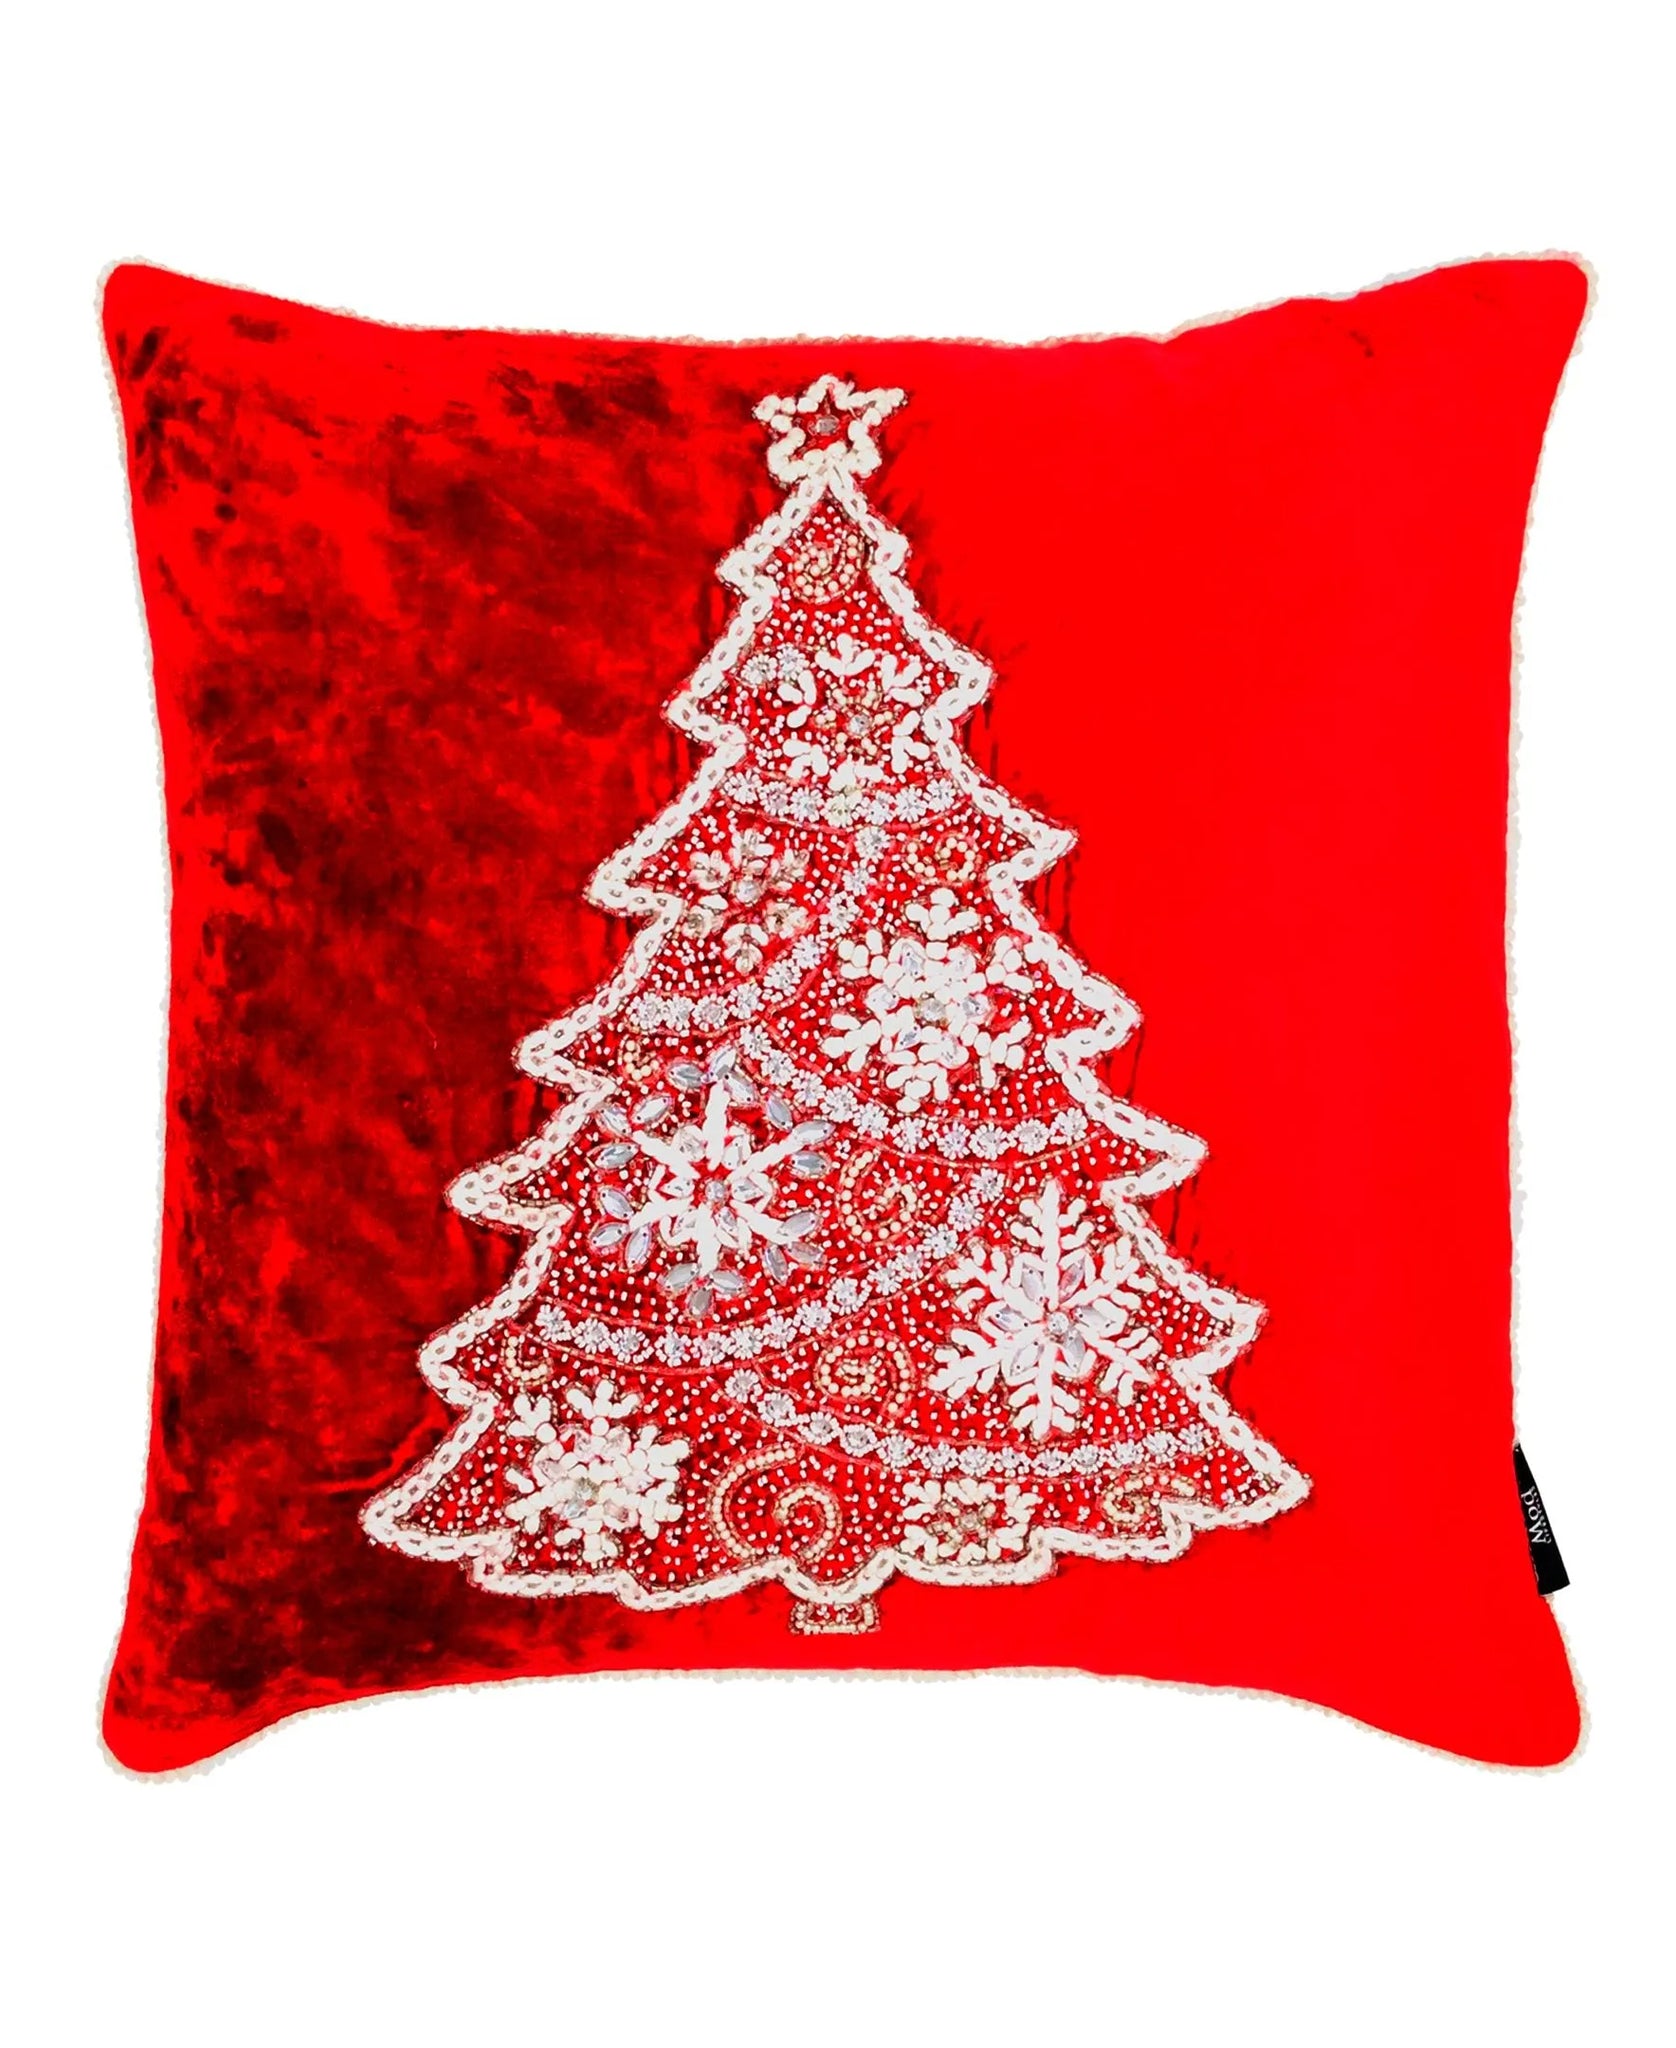 Christmas Tree Embroidery Pillow, Red/White - 20" x 20" home decor - Mod Lifestyles